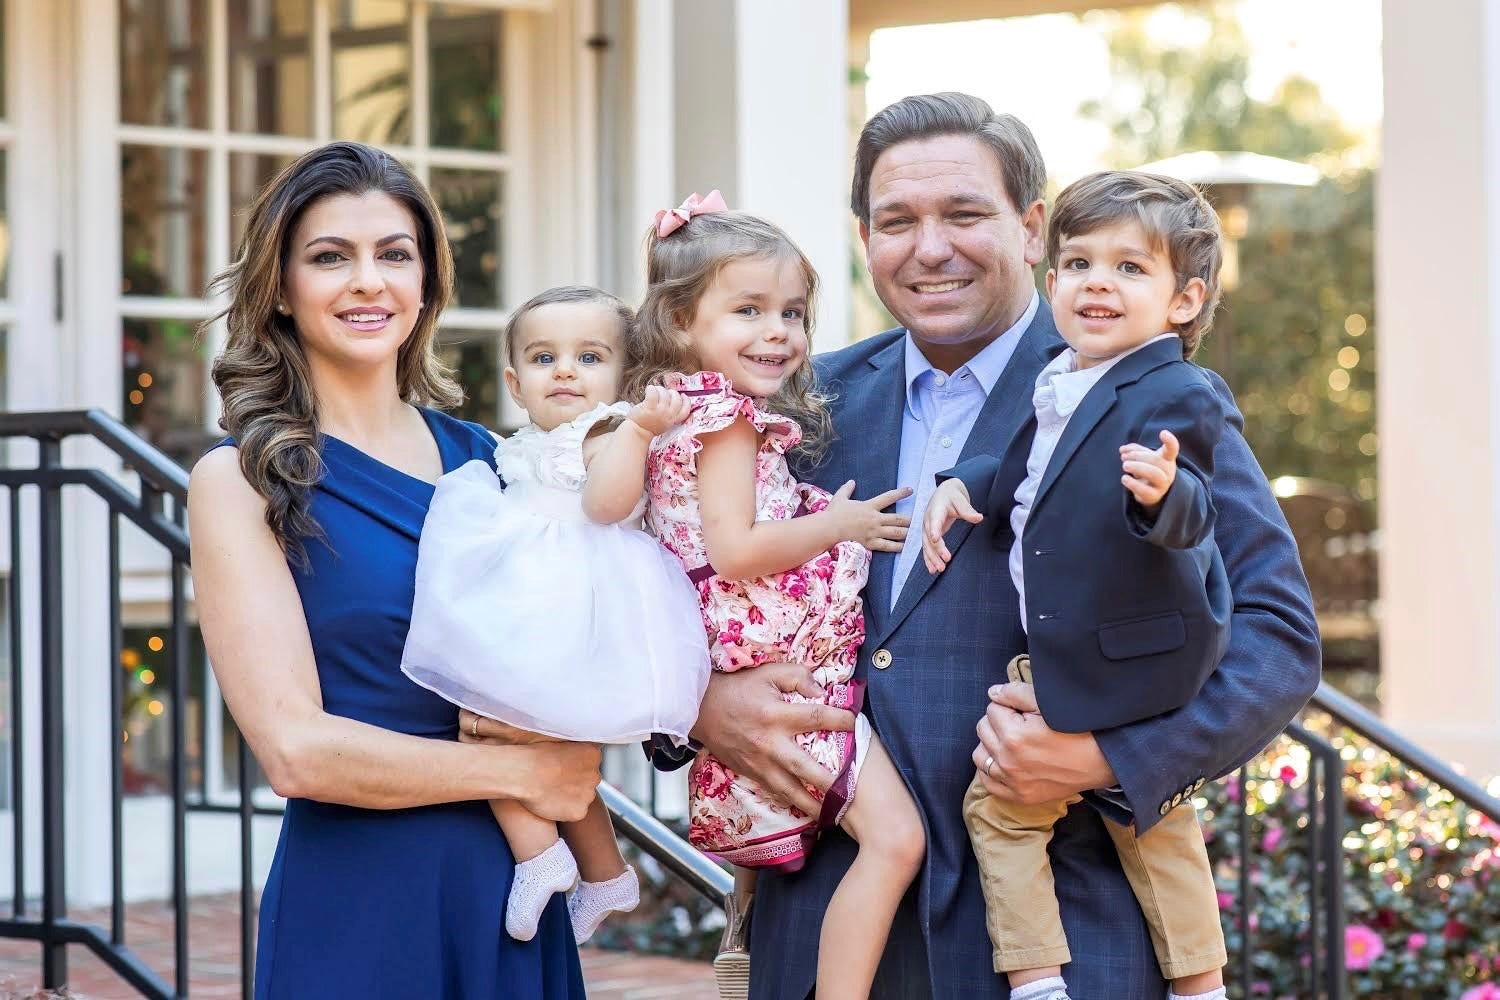 DeSantis, first lady vow to ‘change the narrative’ on kids’ mental health, keep politics out of classroom